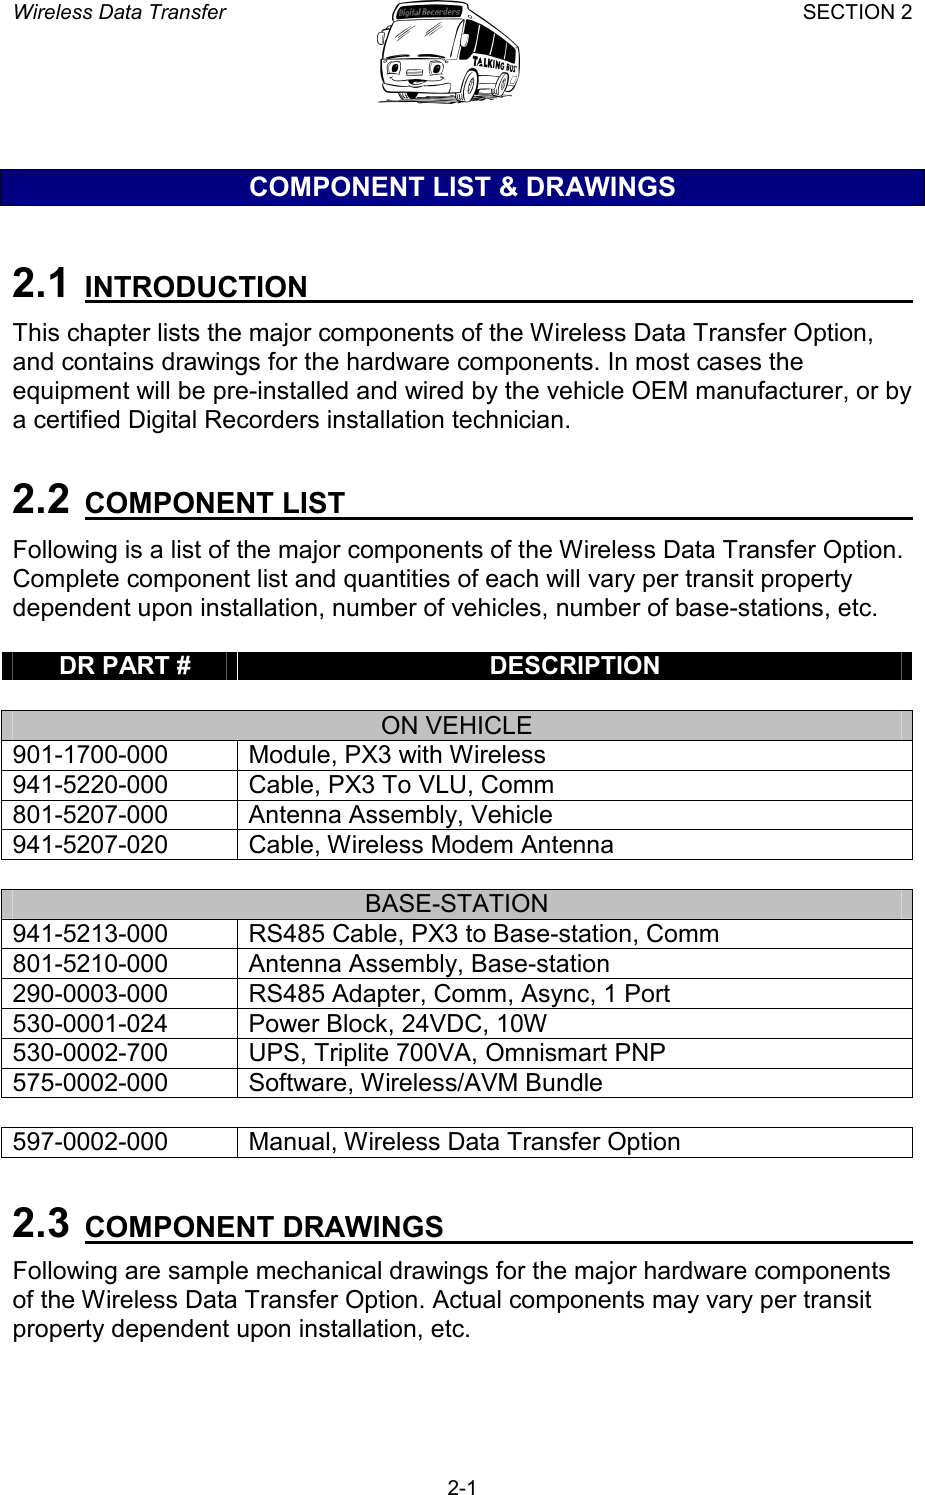 Wireless Data Transfer SECTION 2       2-1 COMPONENT LIST &amp; DRAWINGS  2.1  INTRODUCTION   This chapter lists the major components of the Wireless Data Transfer Option, and contains drawings for the hardware components. In most cases the equipment will be pre-installed and wired by the vehicle OEM manufacturer, or by a certified Digital Recorders installation technician.  2.2  COMPONENT LIST   Following is a list of the major components of the Wireless Data Transfer Option. Complete component list and quantities of each will vary per transit property dependent upon installation, number of vehicles, number of base-stations, etc.  DR PART #  DESCRIPTION  ON VEHICLE 901-1700-000 Module, PX3 with Wireless 941-5220-000  Cable, PX3 To VLU, Comm 801-5207-000  Antenna Assembly, Vehicle 941-5207-020  Cable, Wireless Modem Antenna  BASE-STATION 941-5213-000  RS485 Cable, PX3 to Base-station, Comm 801-5210-000  Antenna Assembly, Base-station 290-0003-000  RS485 Adapter, Comm, Async, 1 Port 530-0001-024  Power Block, 24VDC, 10W 530-0002-700  UPS, Triplite 700VA, Omnismart PNP 575-0002-000 Software, Wireless/AVM Bundle   597-0002-000  Manual, Wireless Data Transfer Option  2.3 COMPONENT DRAWINGS   Following are sample mechanical drawings for the major hardware components of the Wireless Data Transfer Option. Actual components may vary per transit property dependent upon installation, etc.  